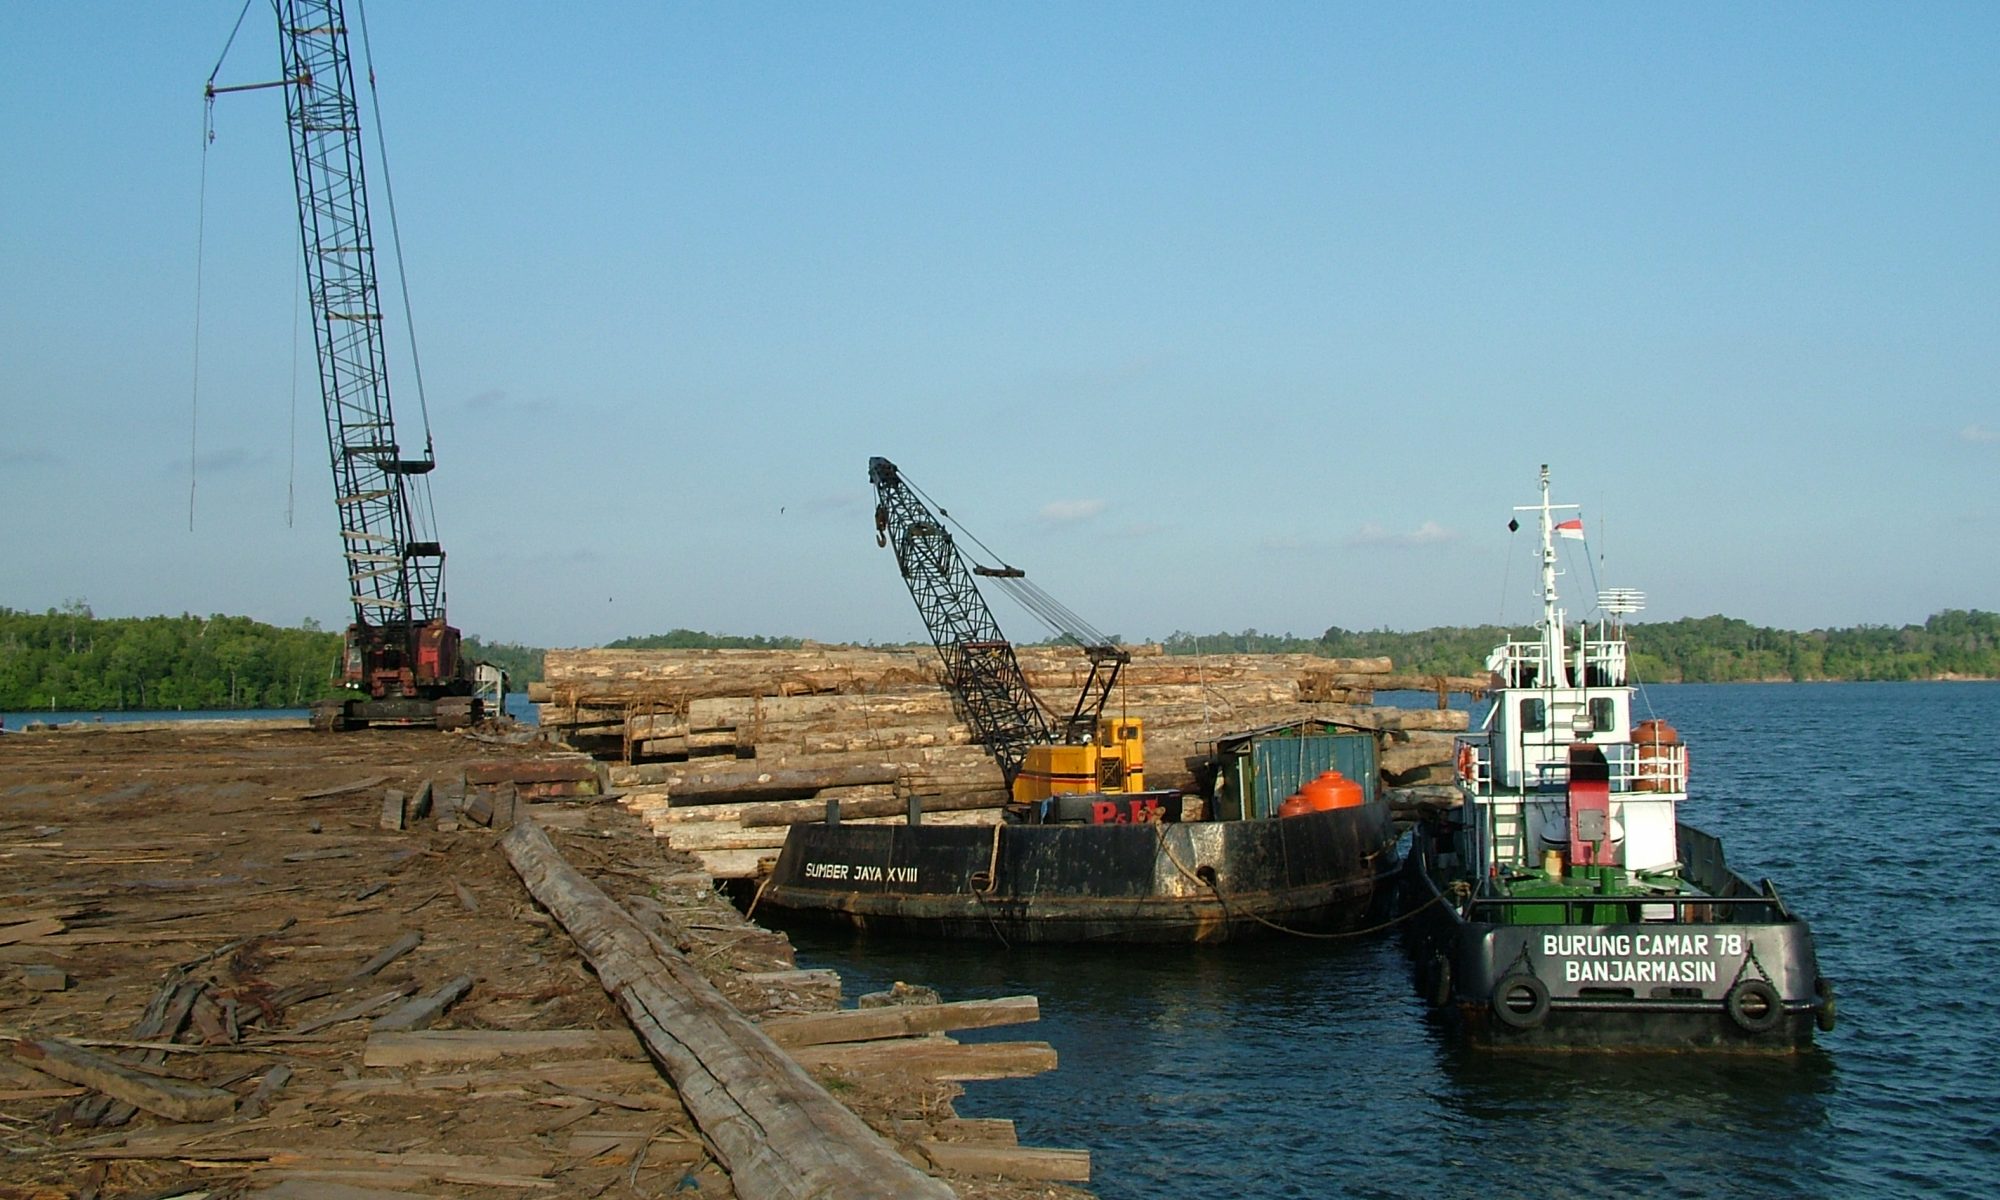 Loading Tropical Timber. RJW Oliver